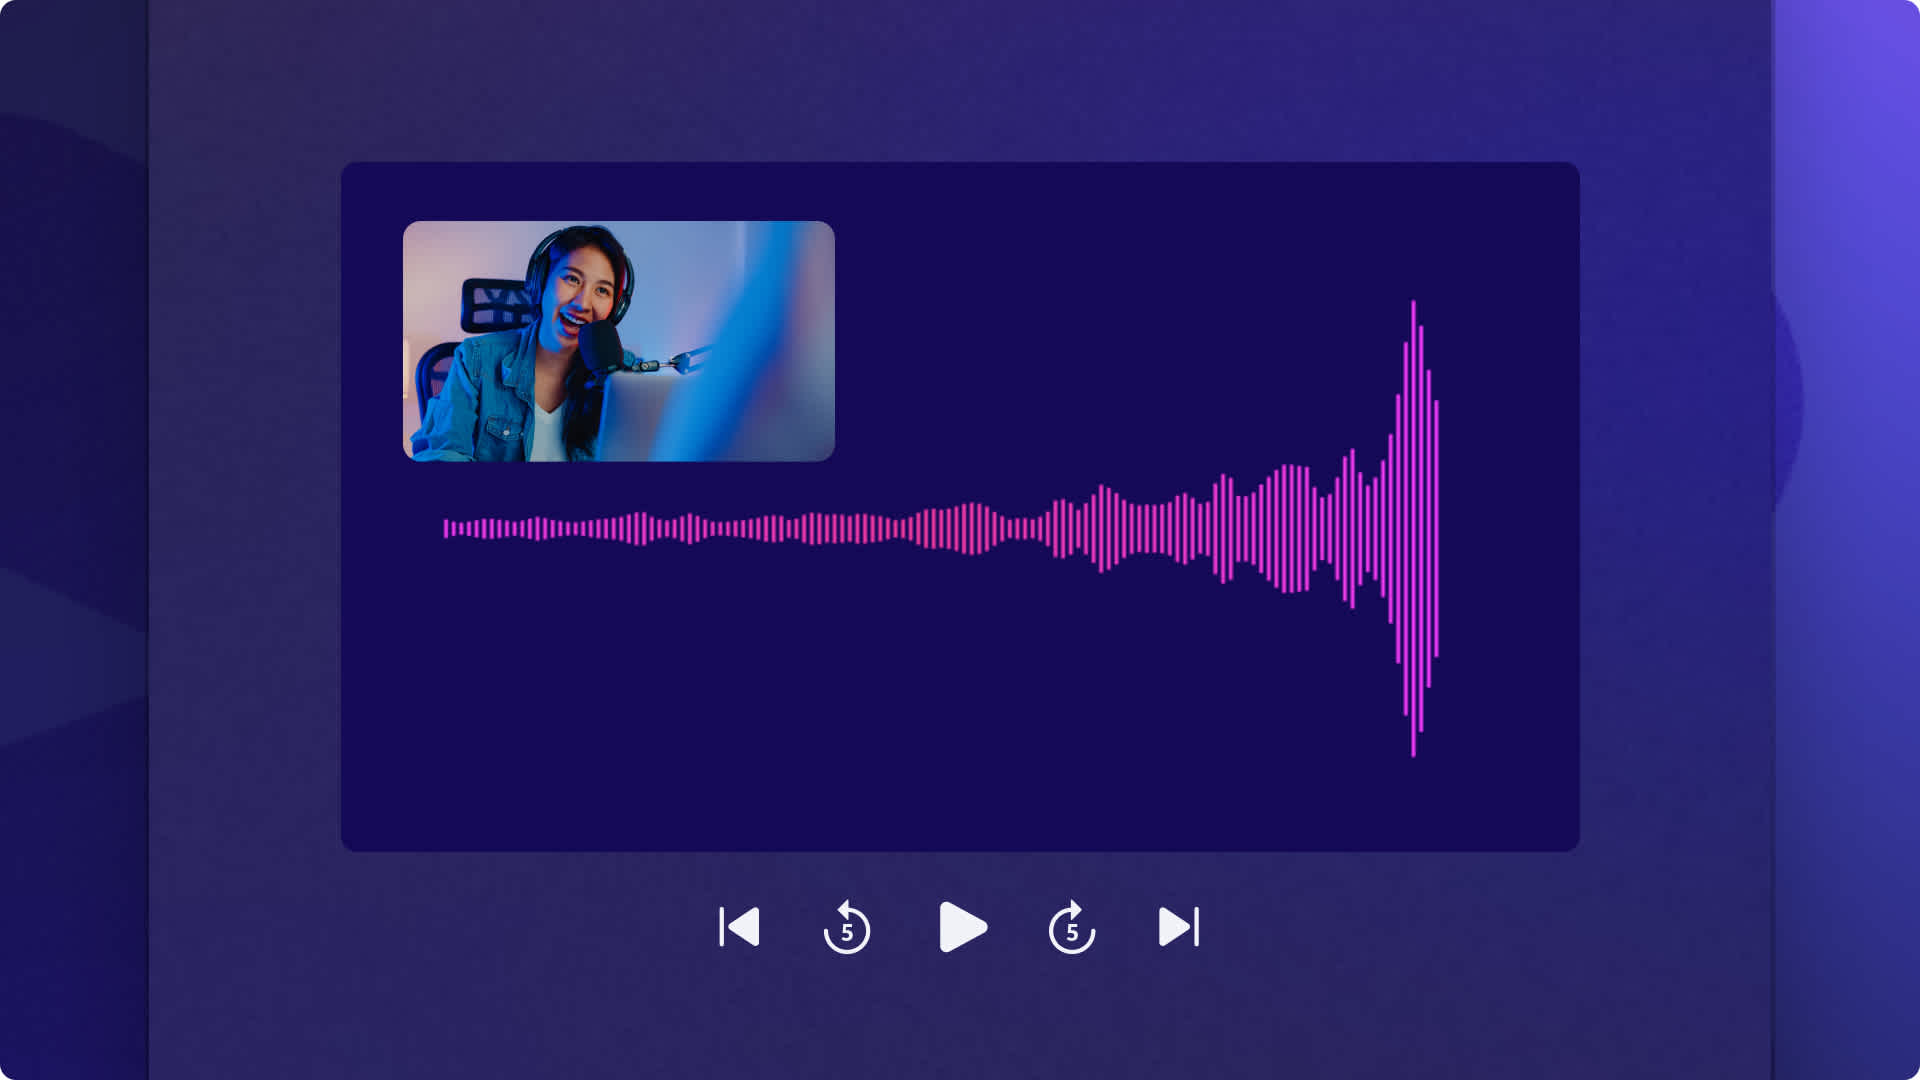 Voice visualizer example in Clipchamp